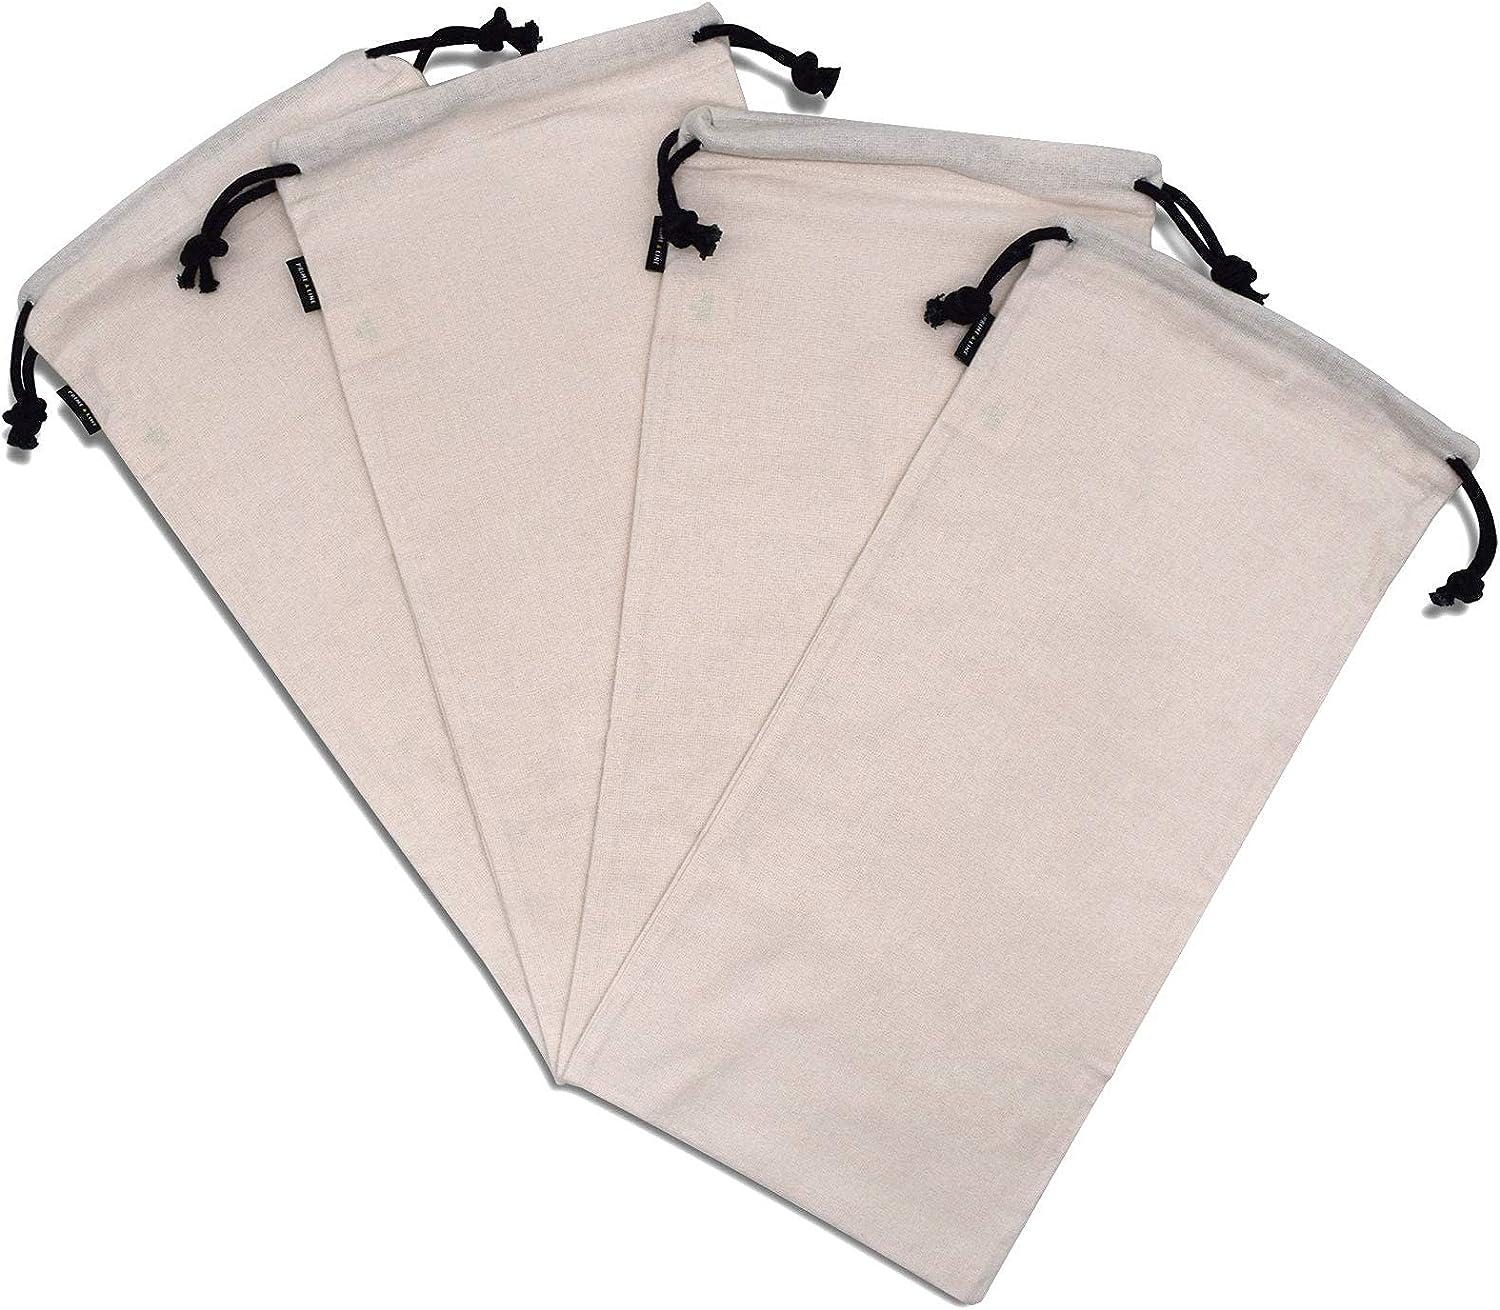 Shoe Dust Bags - 2 Pack Beige Duster Flannel Double Shoe Pouch with  Drawstring Closure, Washable Breathable Cotton Fabric Cloth for Travel,  Home